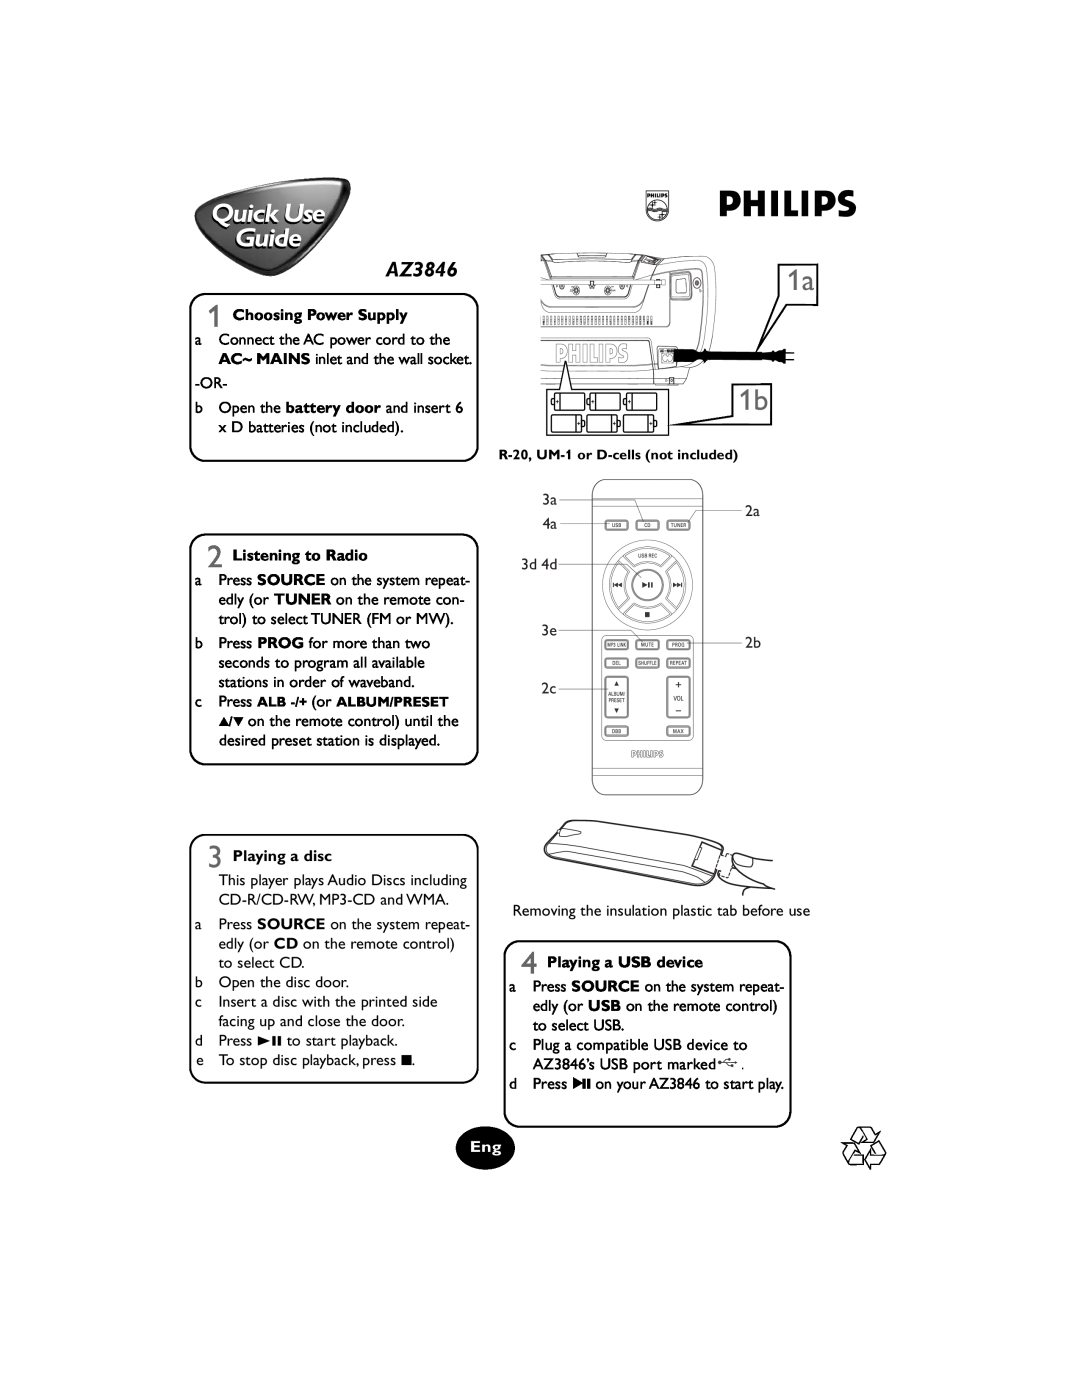 Philips AZ3846/55 manual 1a 1b, Quick Use Guide, Choosing Power Supply, Listening to Radio, Playing a disc 